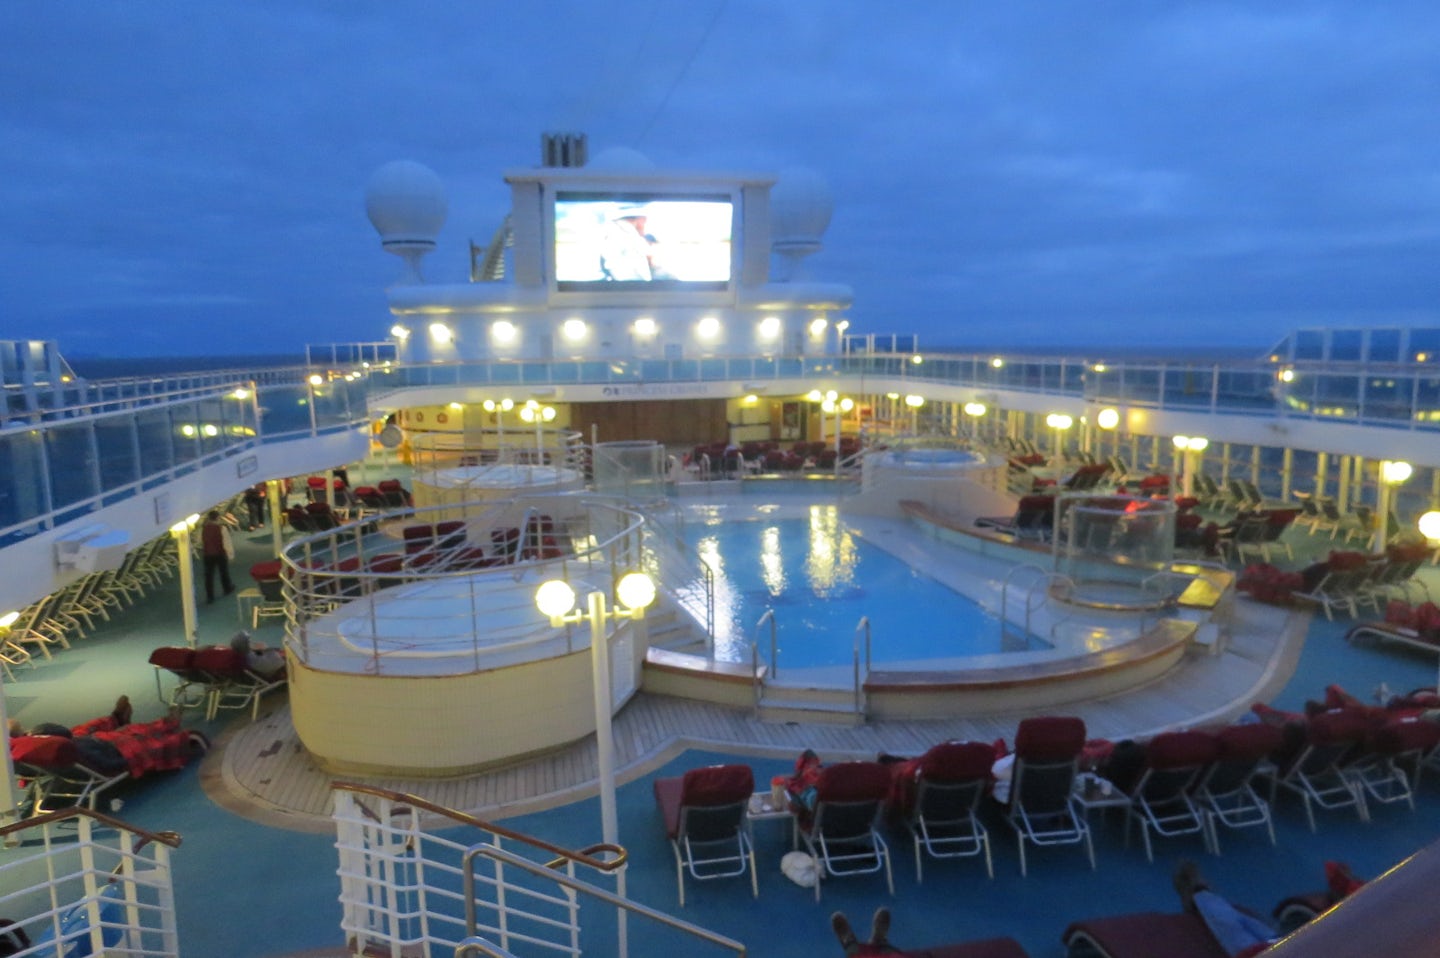 Island Princess in the evening.